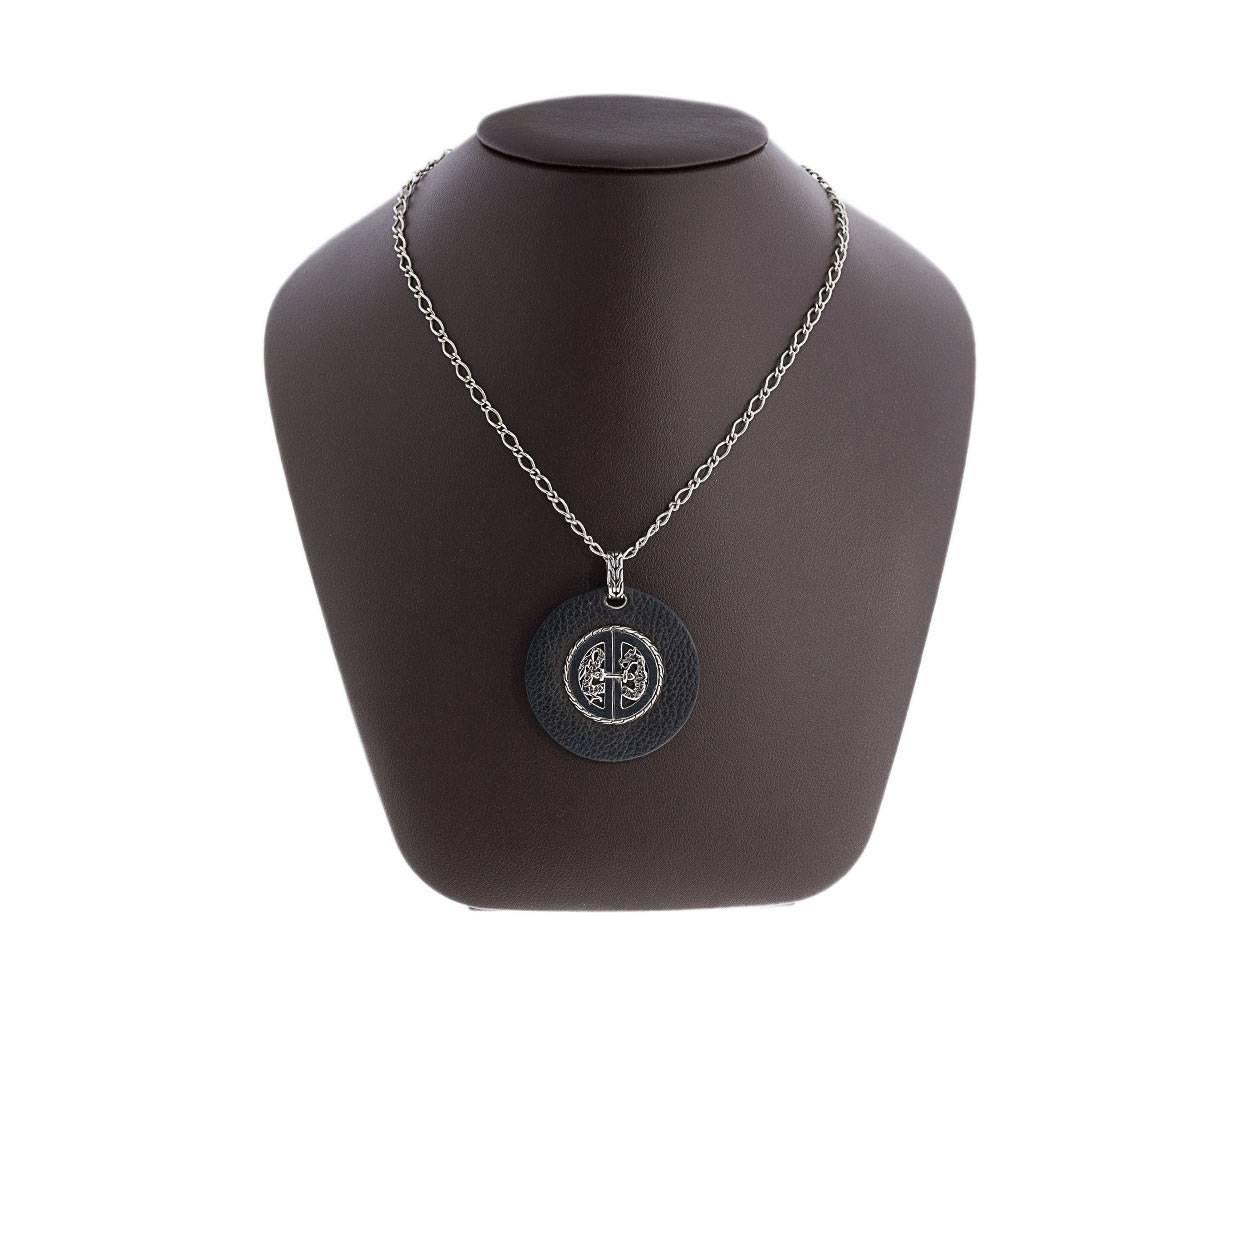 Each piece of John Hardy jewelry has been crafted in Bali since 1975. John Hardy is dedicated to creating timeless one-of-a-kind pieces that are brilliantly alive.
 MSRP $450! 

Details:
John Hardy Naga Dragon Leather and Silver Medallion Pendant